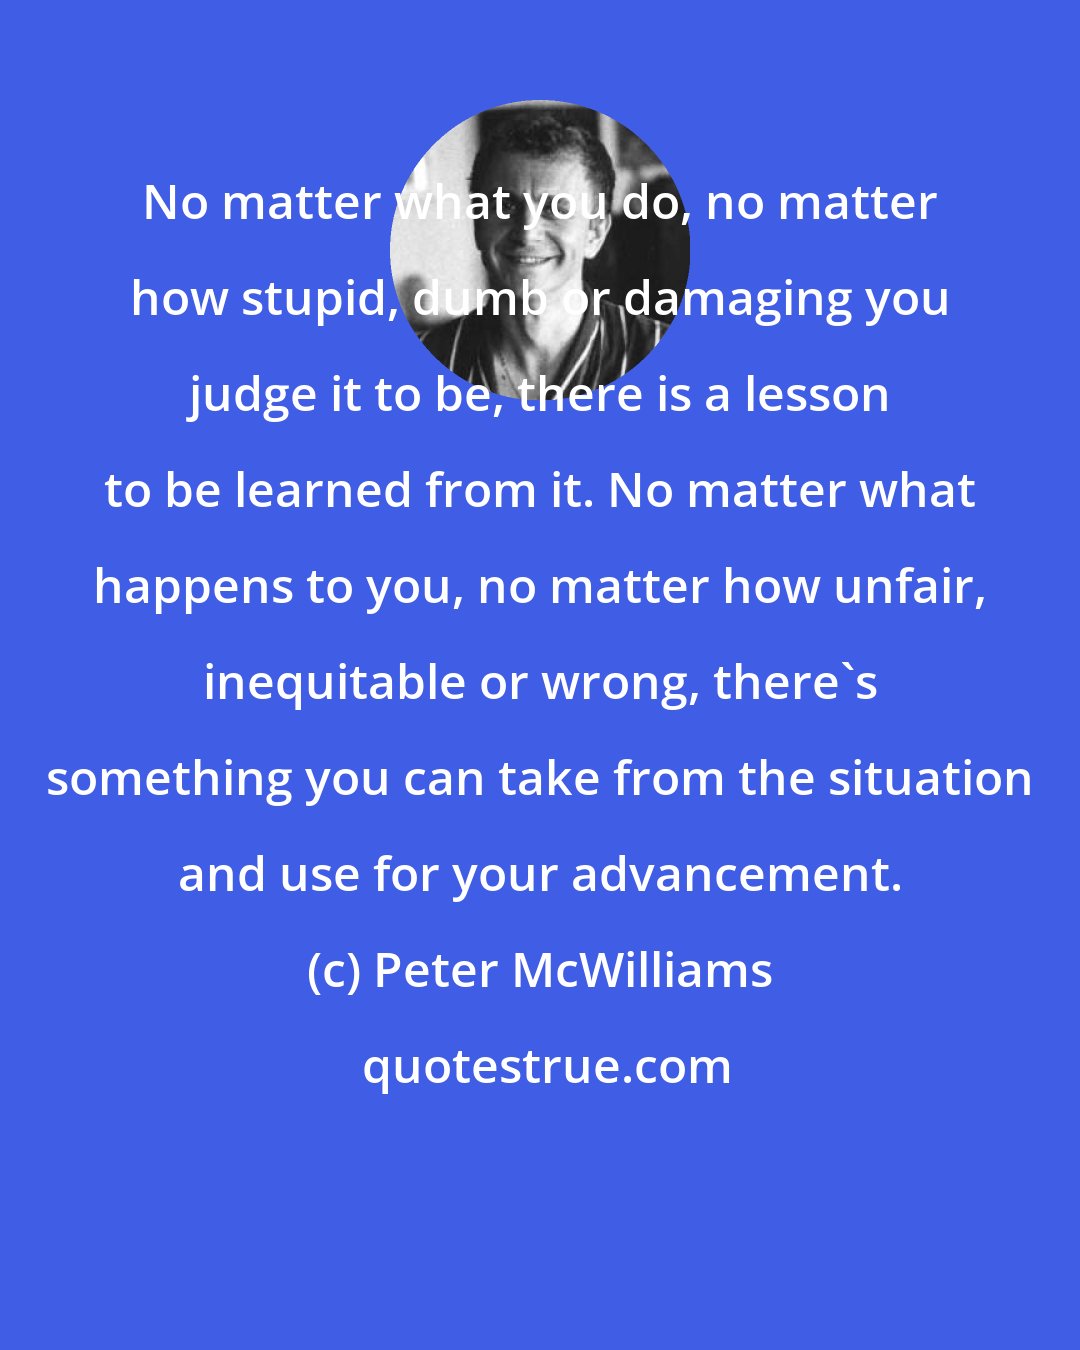 Peter McWilliams: No matter what you do, no matter how stupid, dumb or damaging you judge it to be, there is a lesson to be learned from it. No matter what happens to you, no matter how unfair, inequitable or wrong, there's something you can take from the situation and use for your advancement.